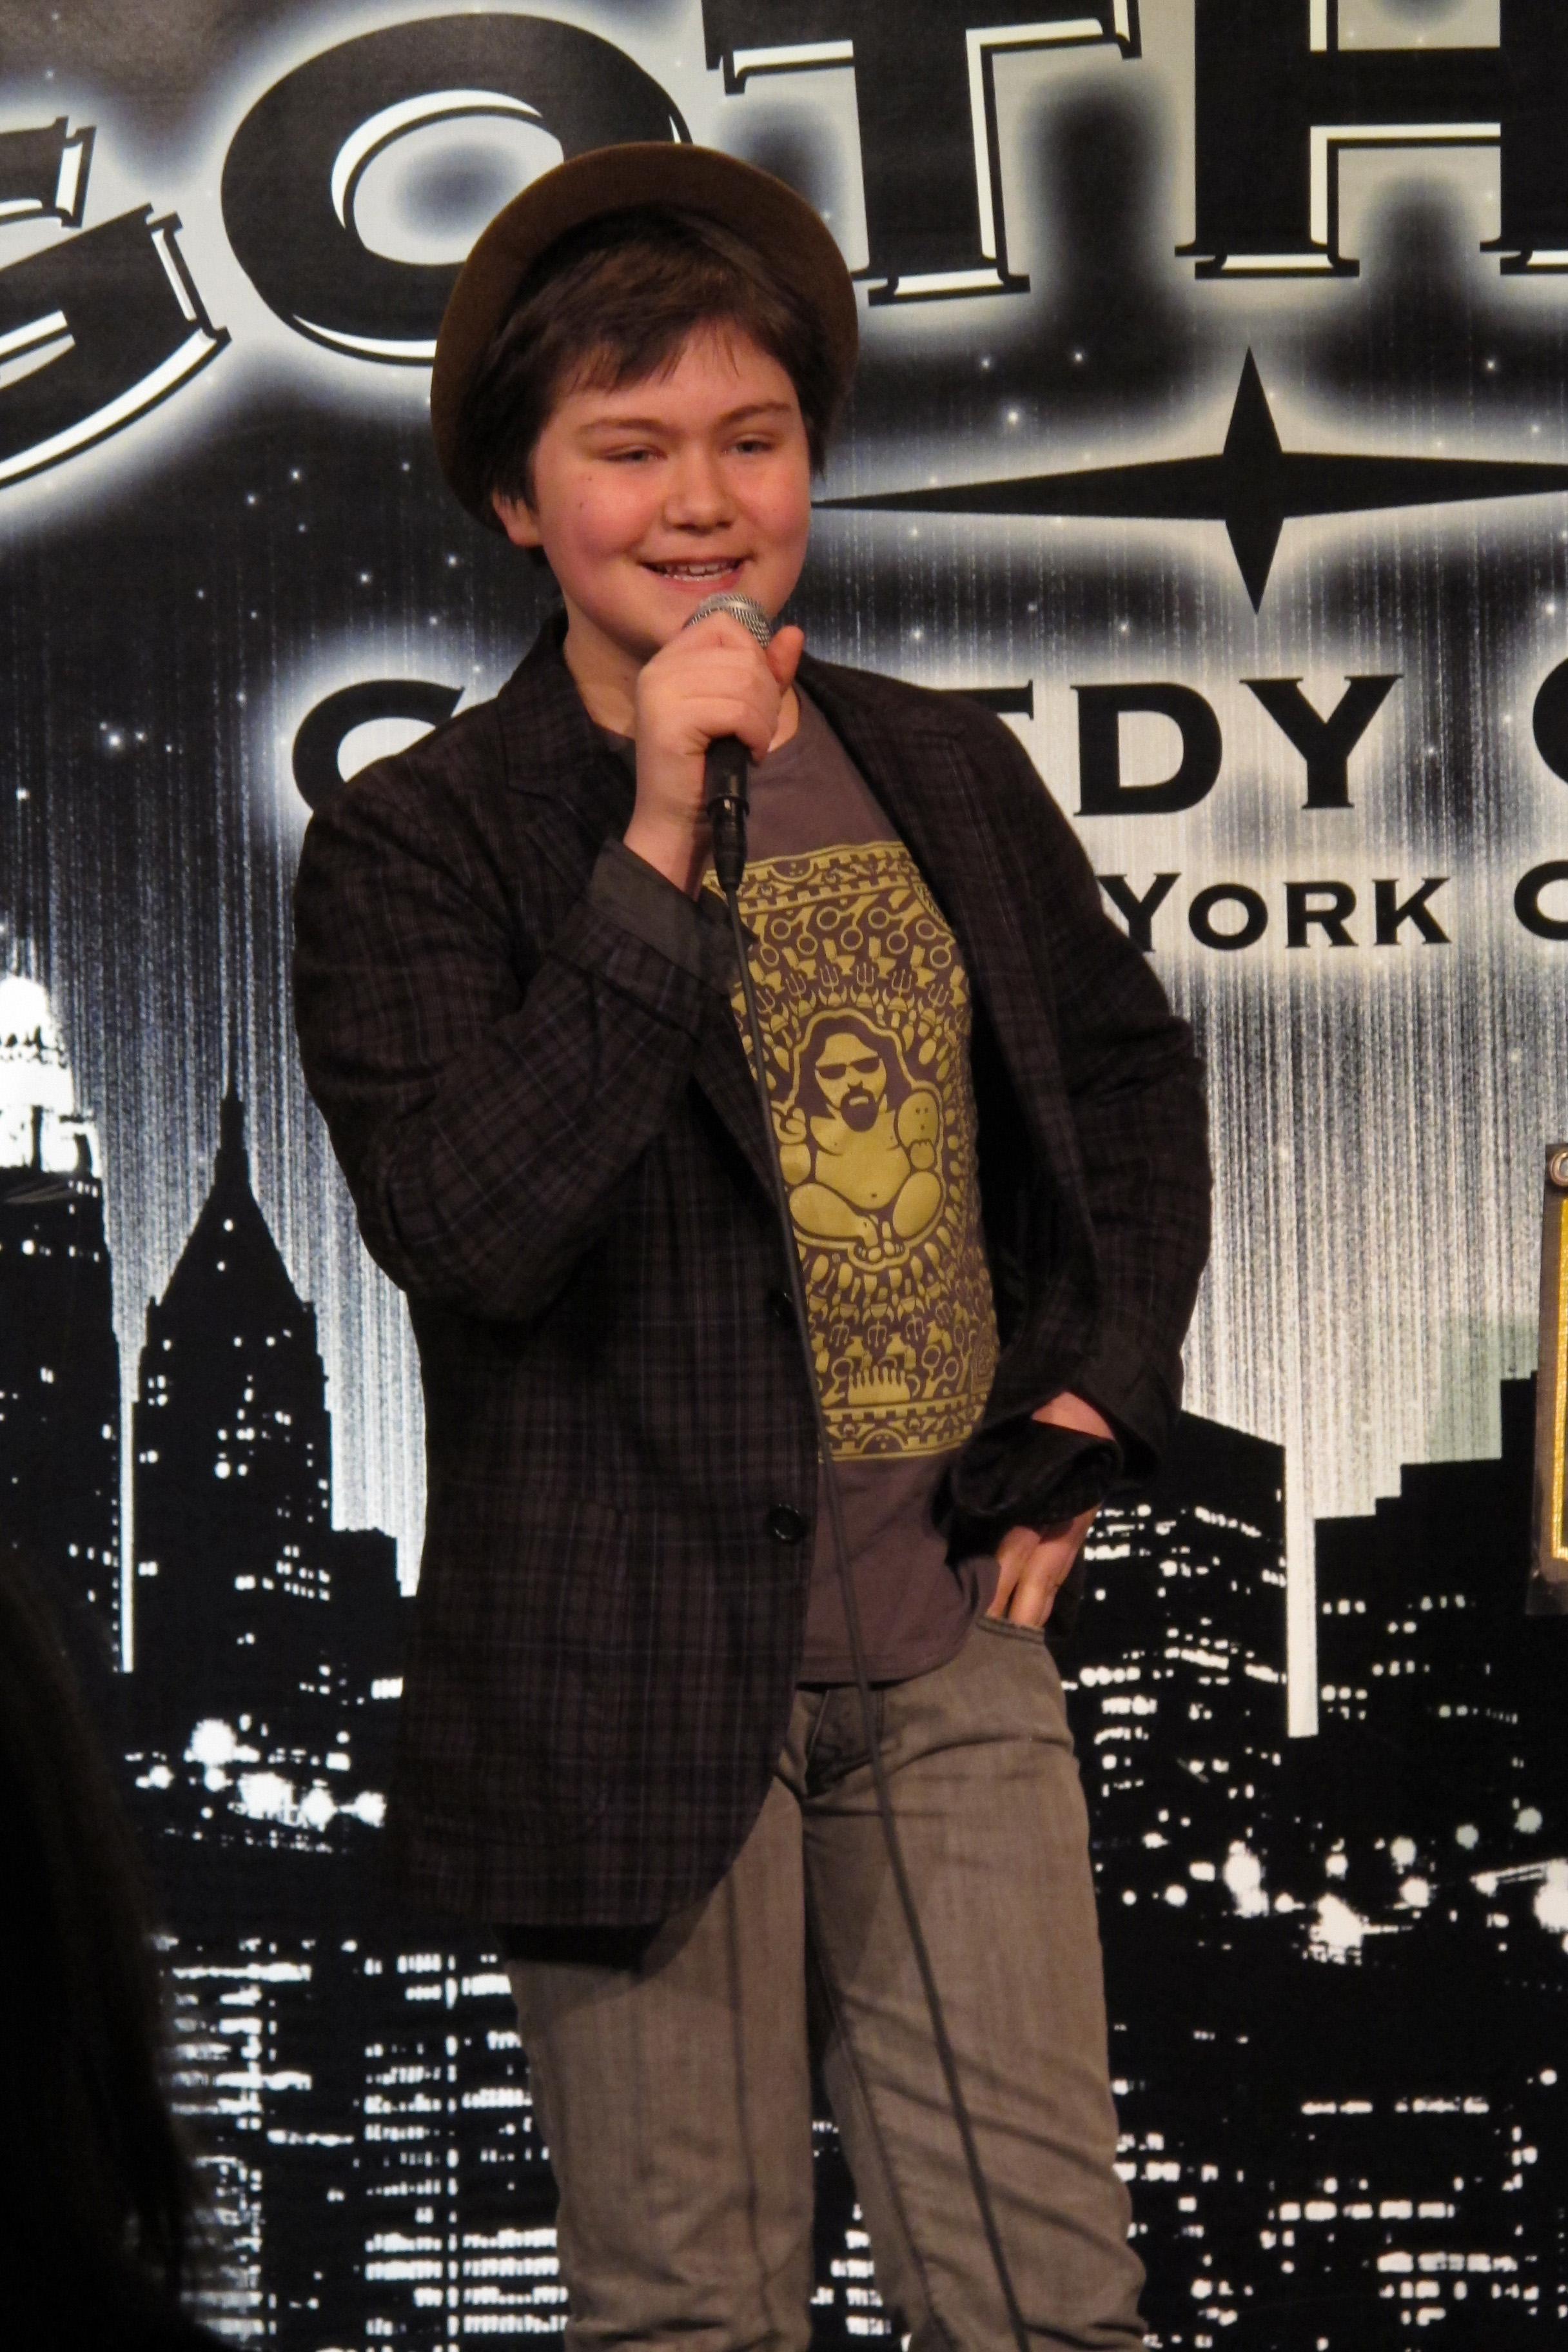 Conor performing his stand up routine at Gotham Comedy Club